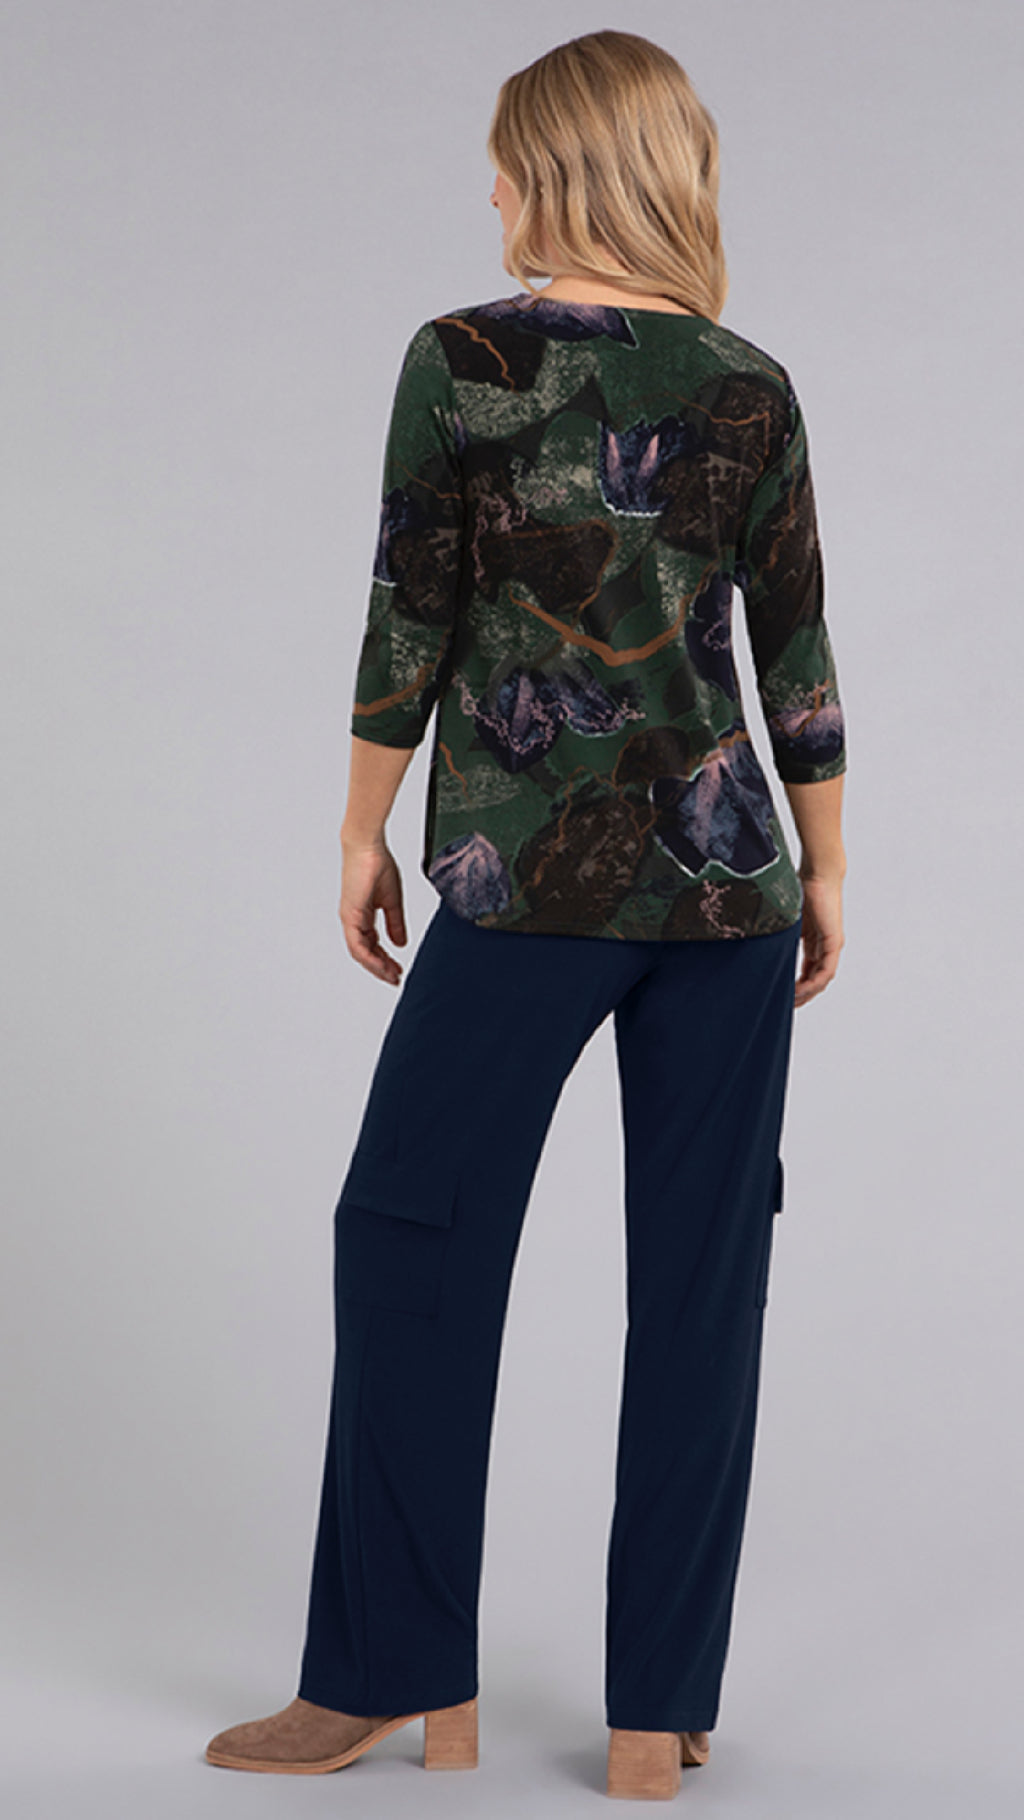 Go to Classic T-Relax, 3/4 Sleeve-Abstract Floral